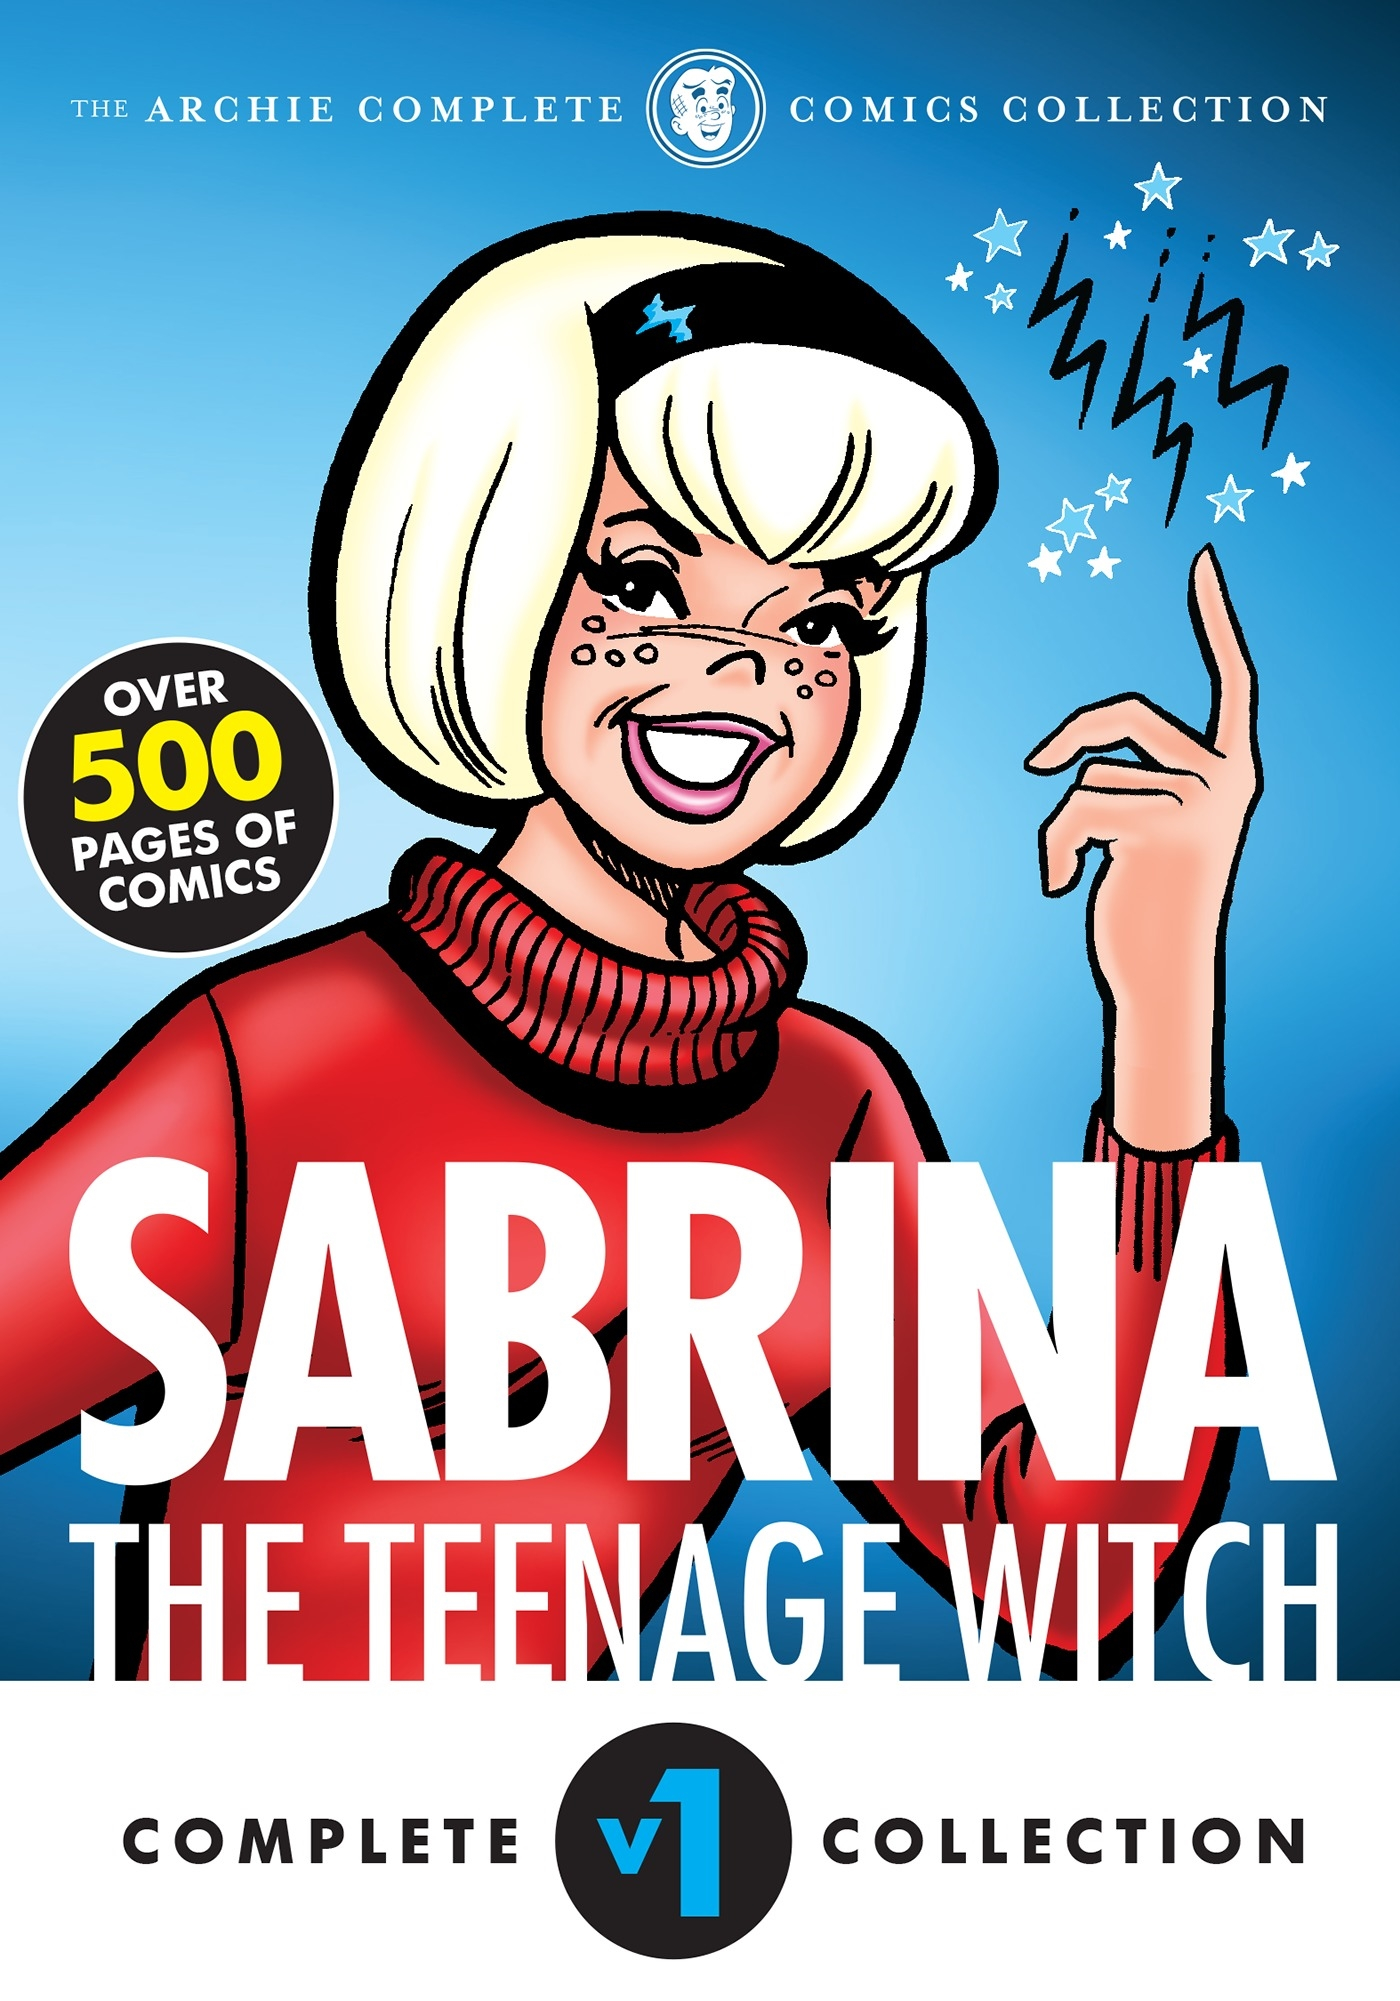 SABRINA THE TEENAGE WITCH COMP TP VOL 01 1962-1971 (RES)